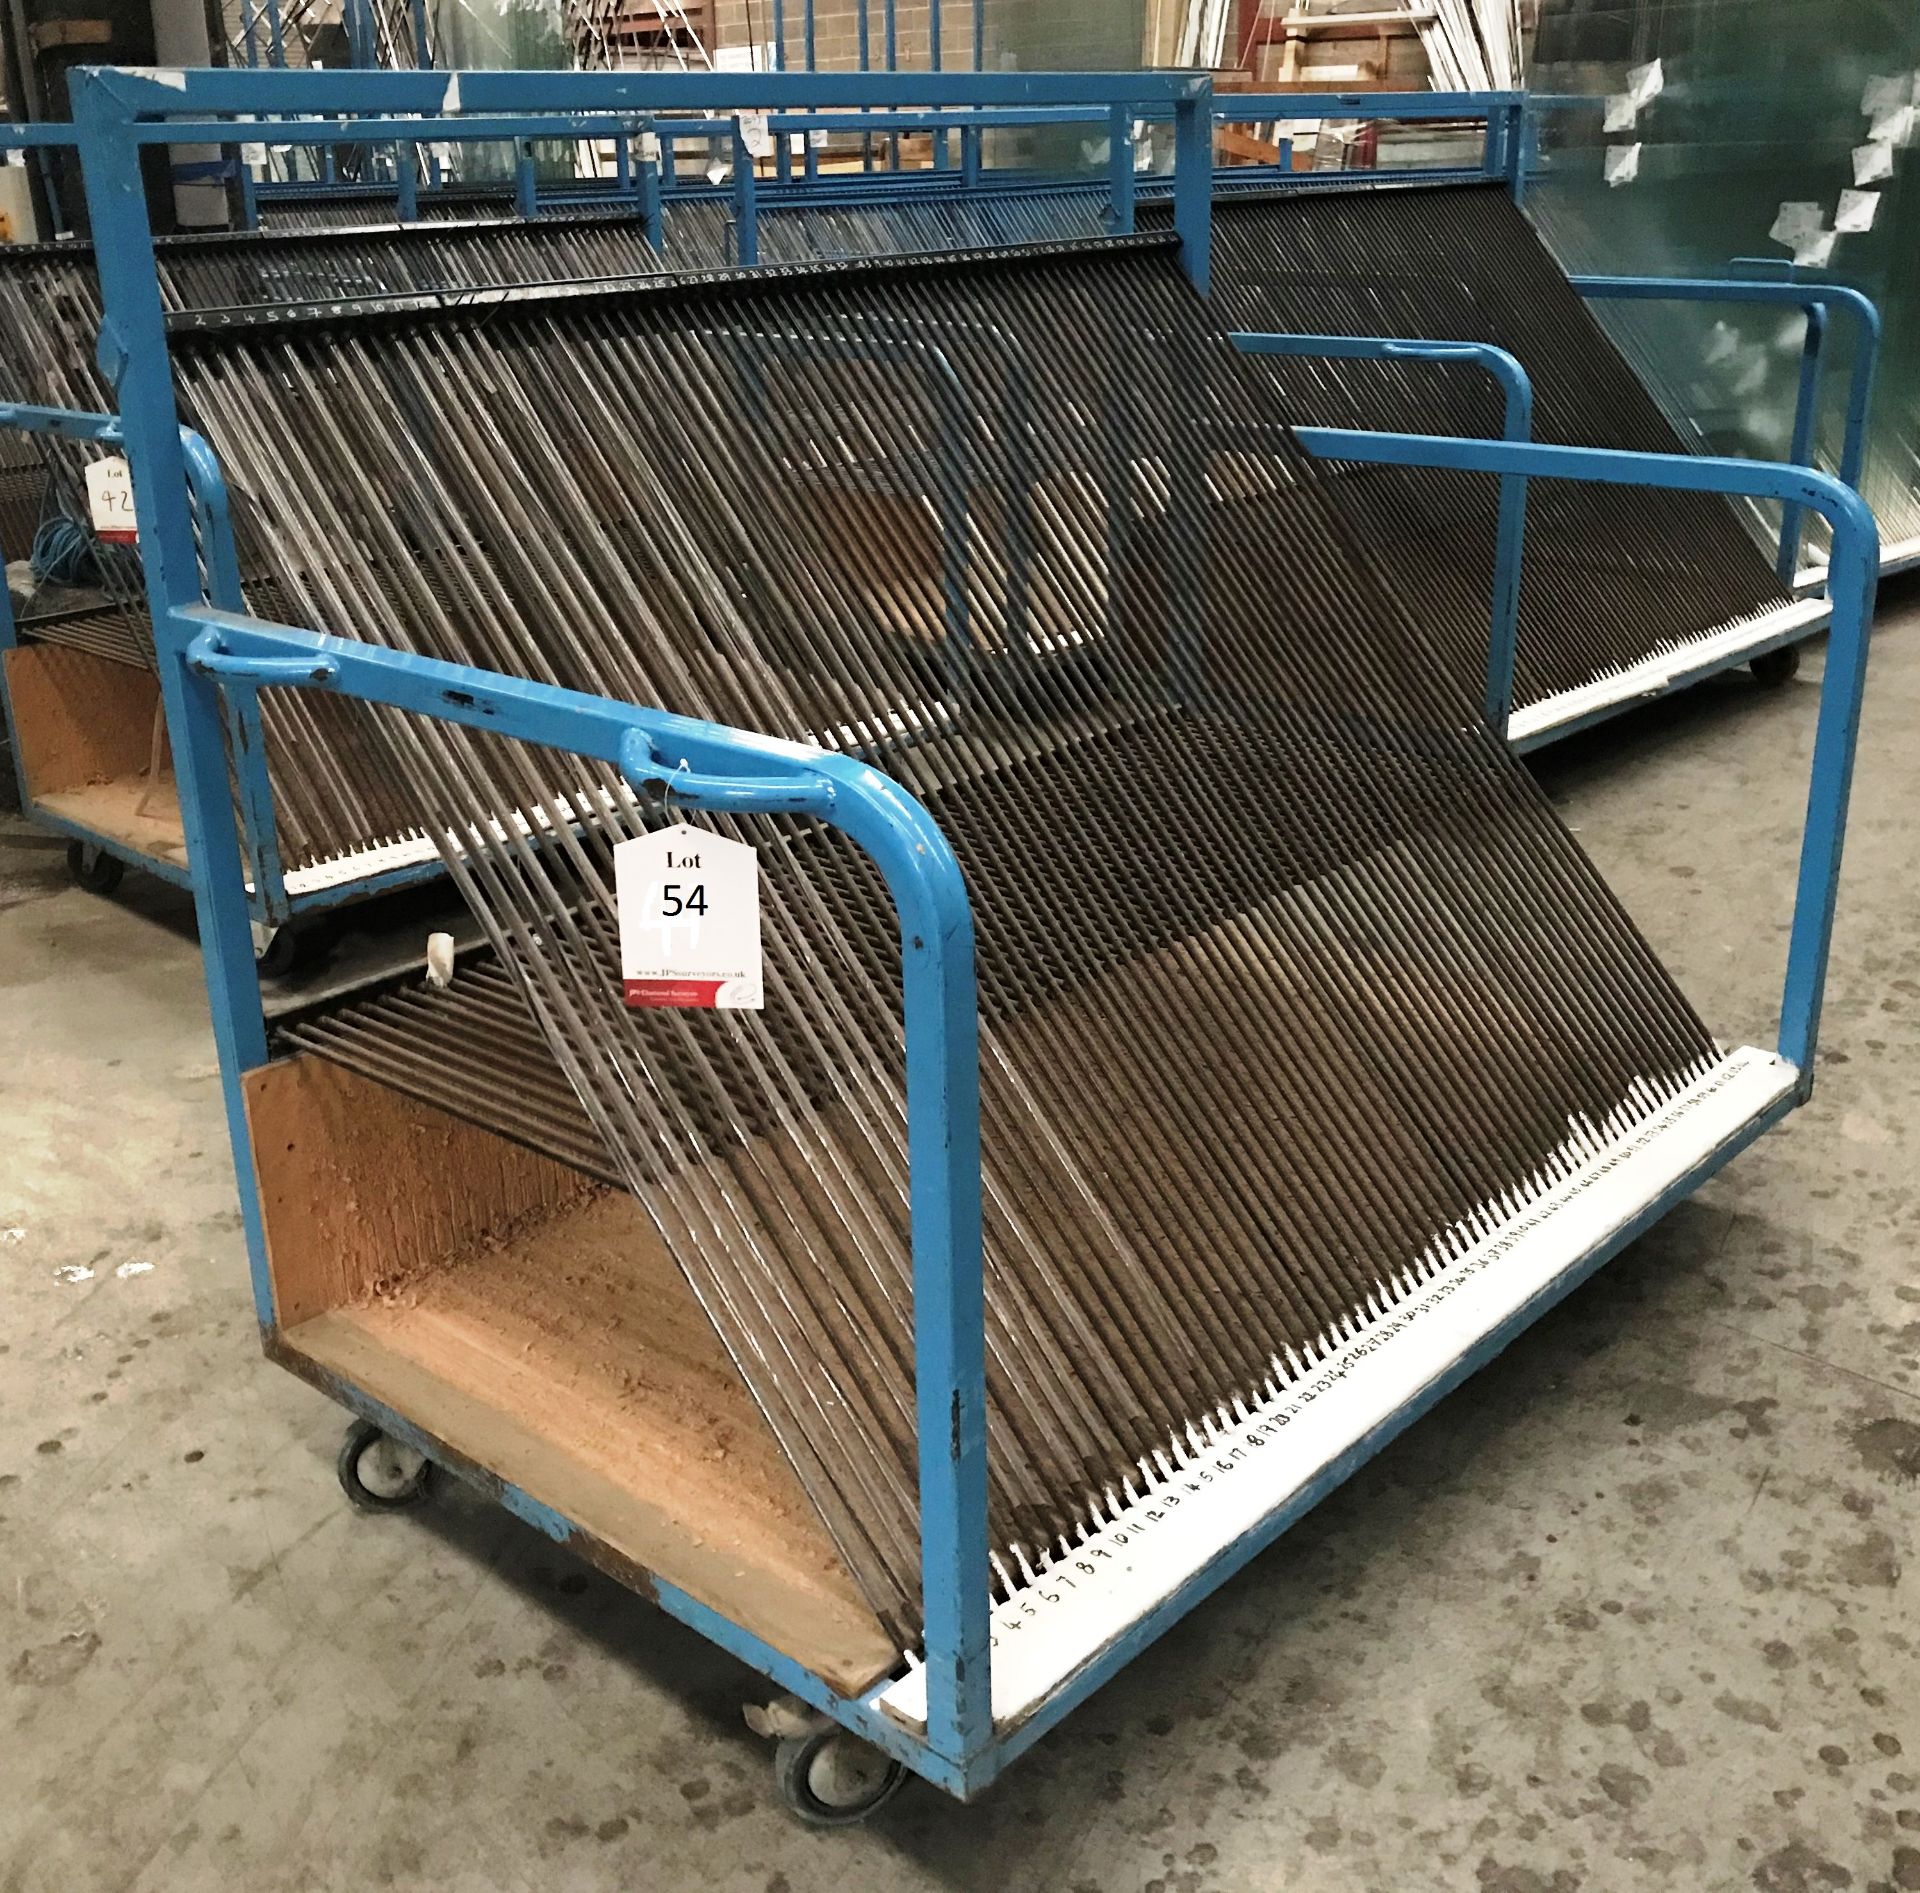 64 Slot Mobile Glass Trolley w/ Side Mounted Handles